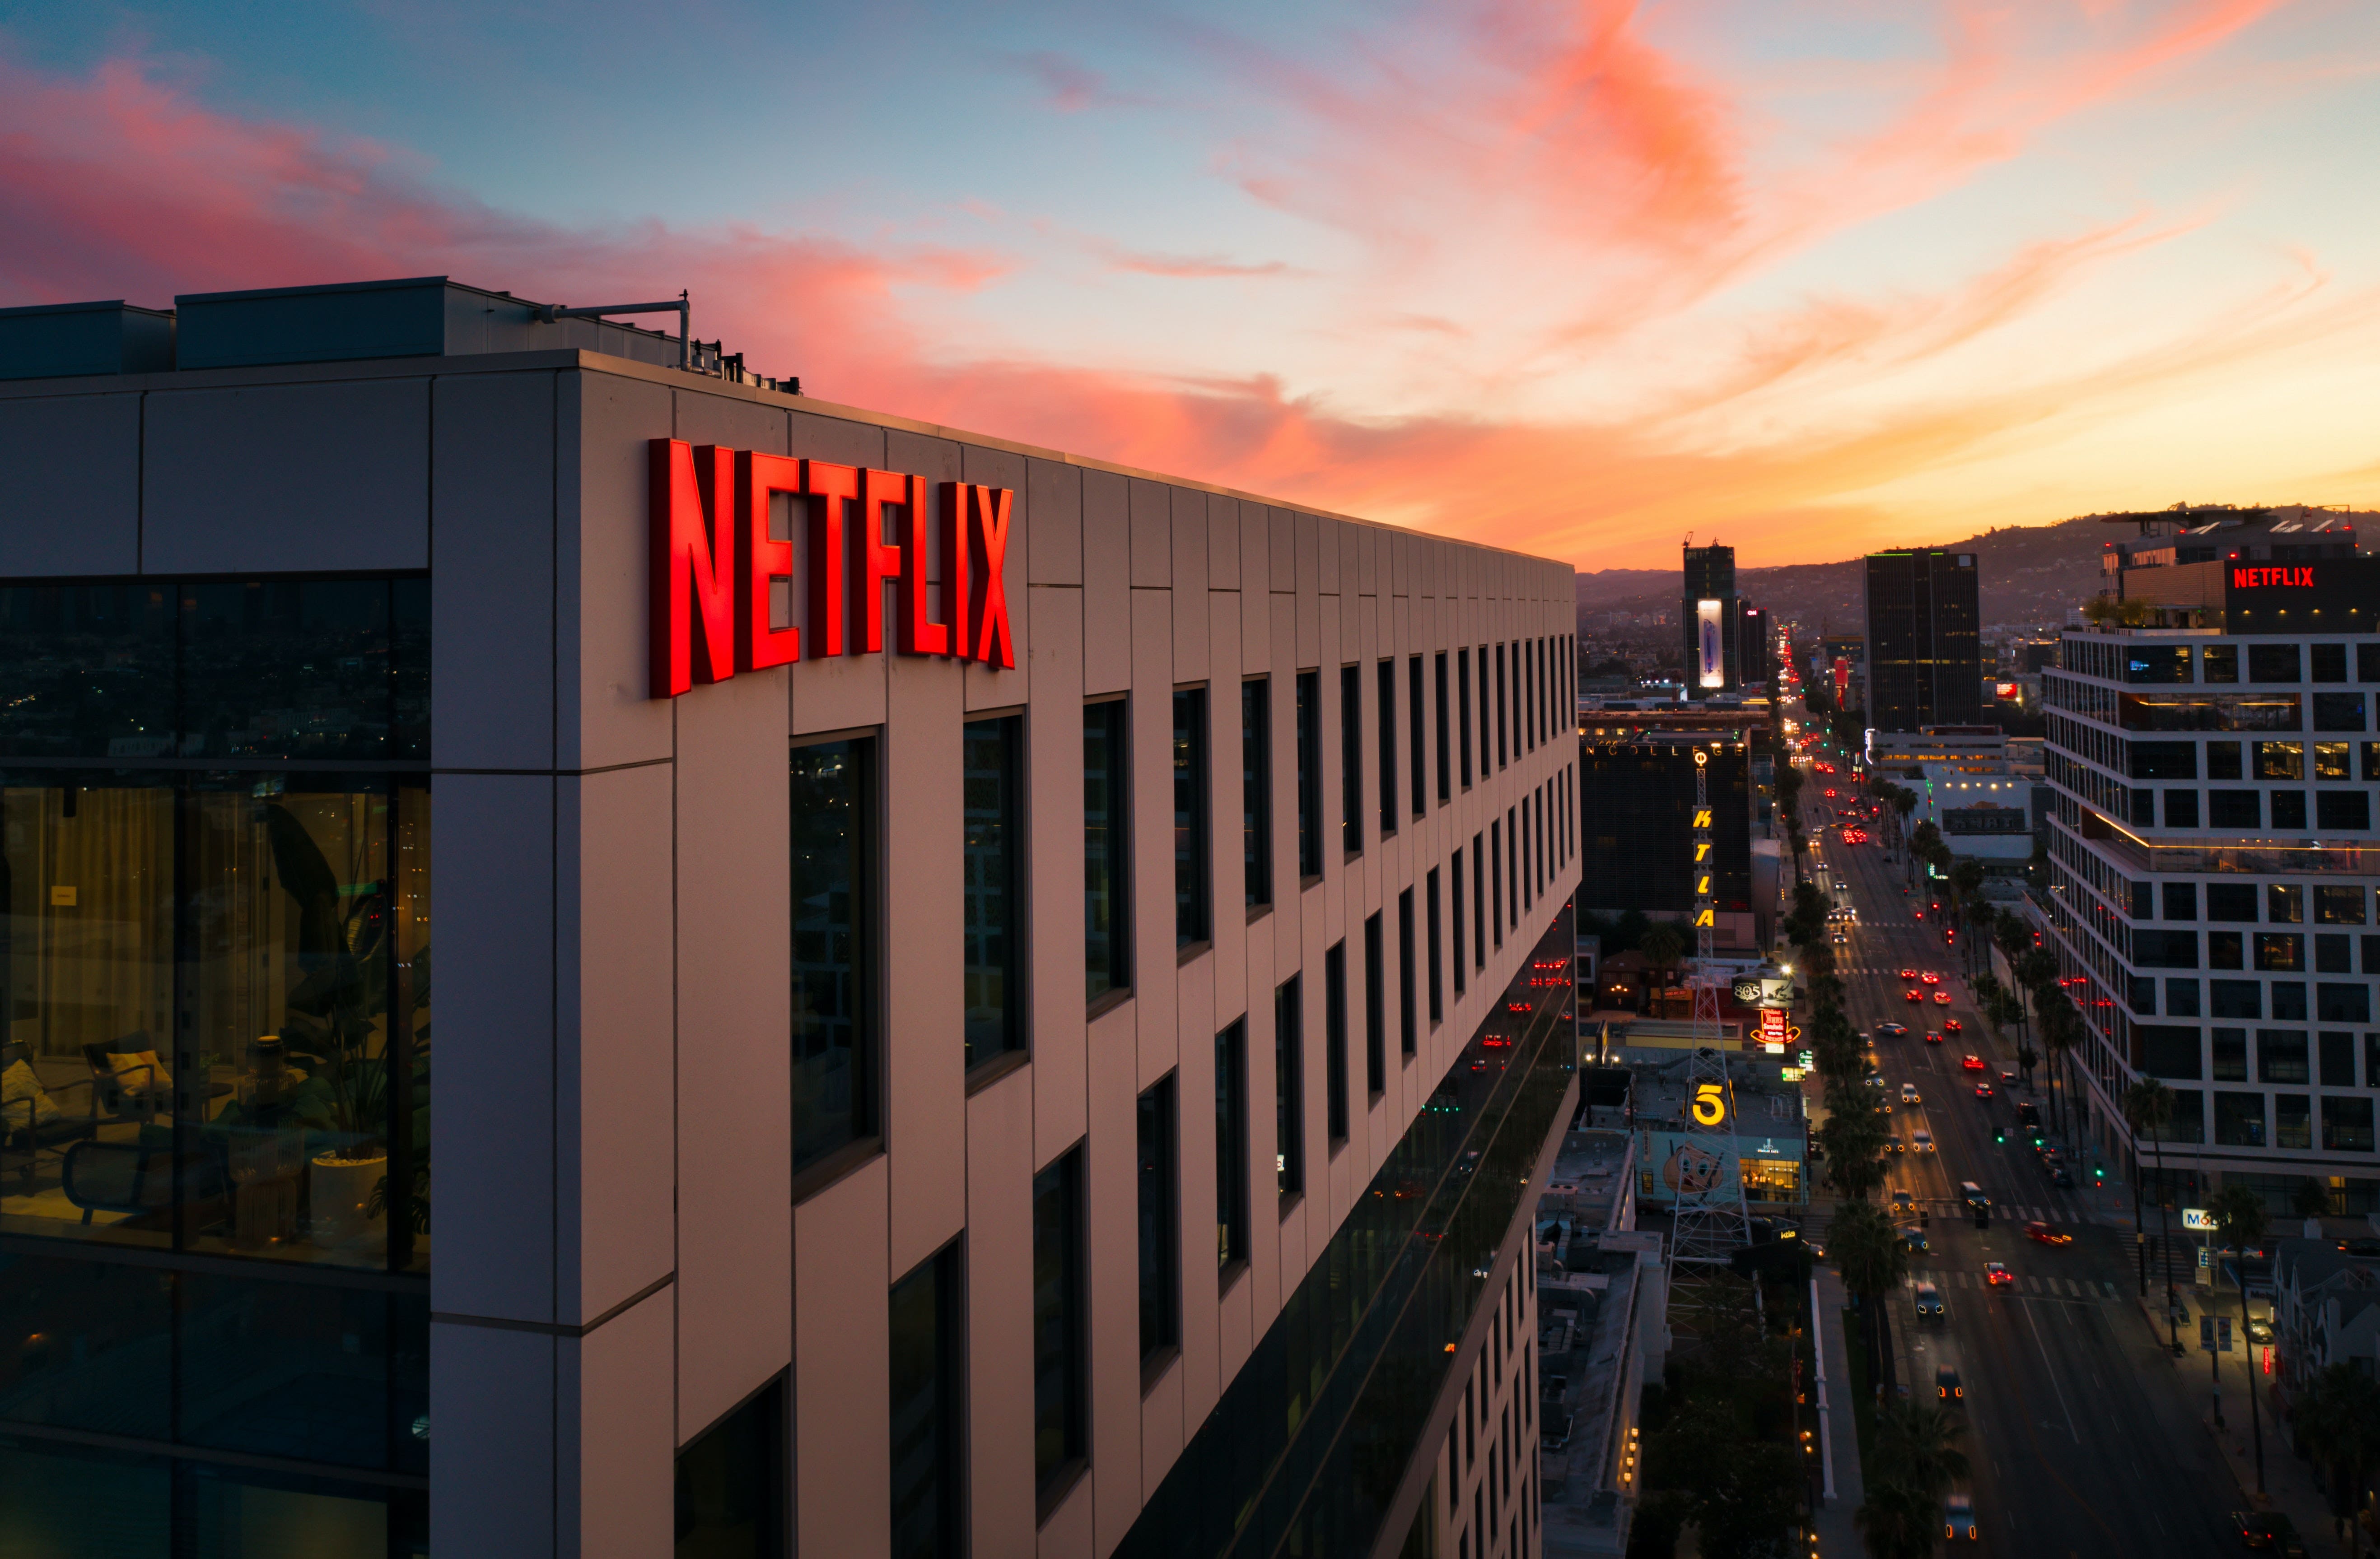 Netflix Stock Dropped After The Last 5 Quarters Of Results: What Are Netflix Earnings Expectations?